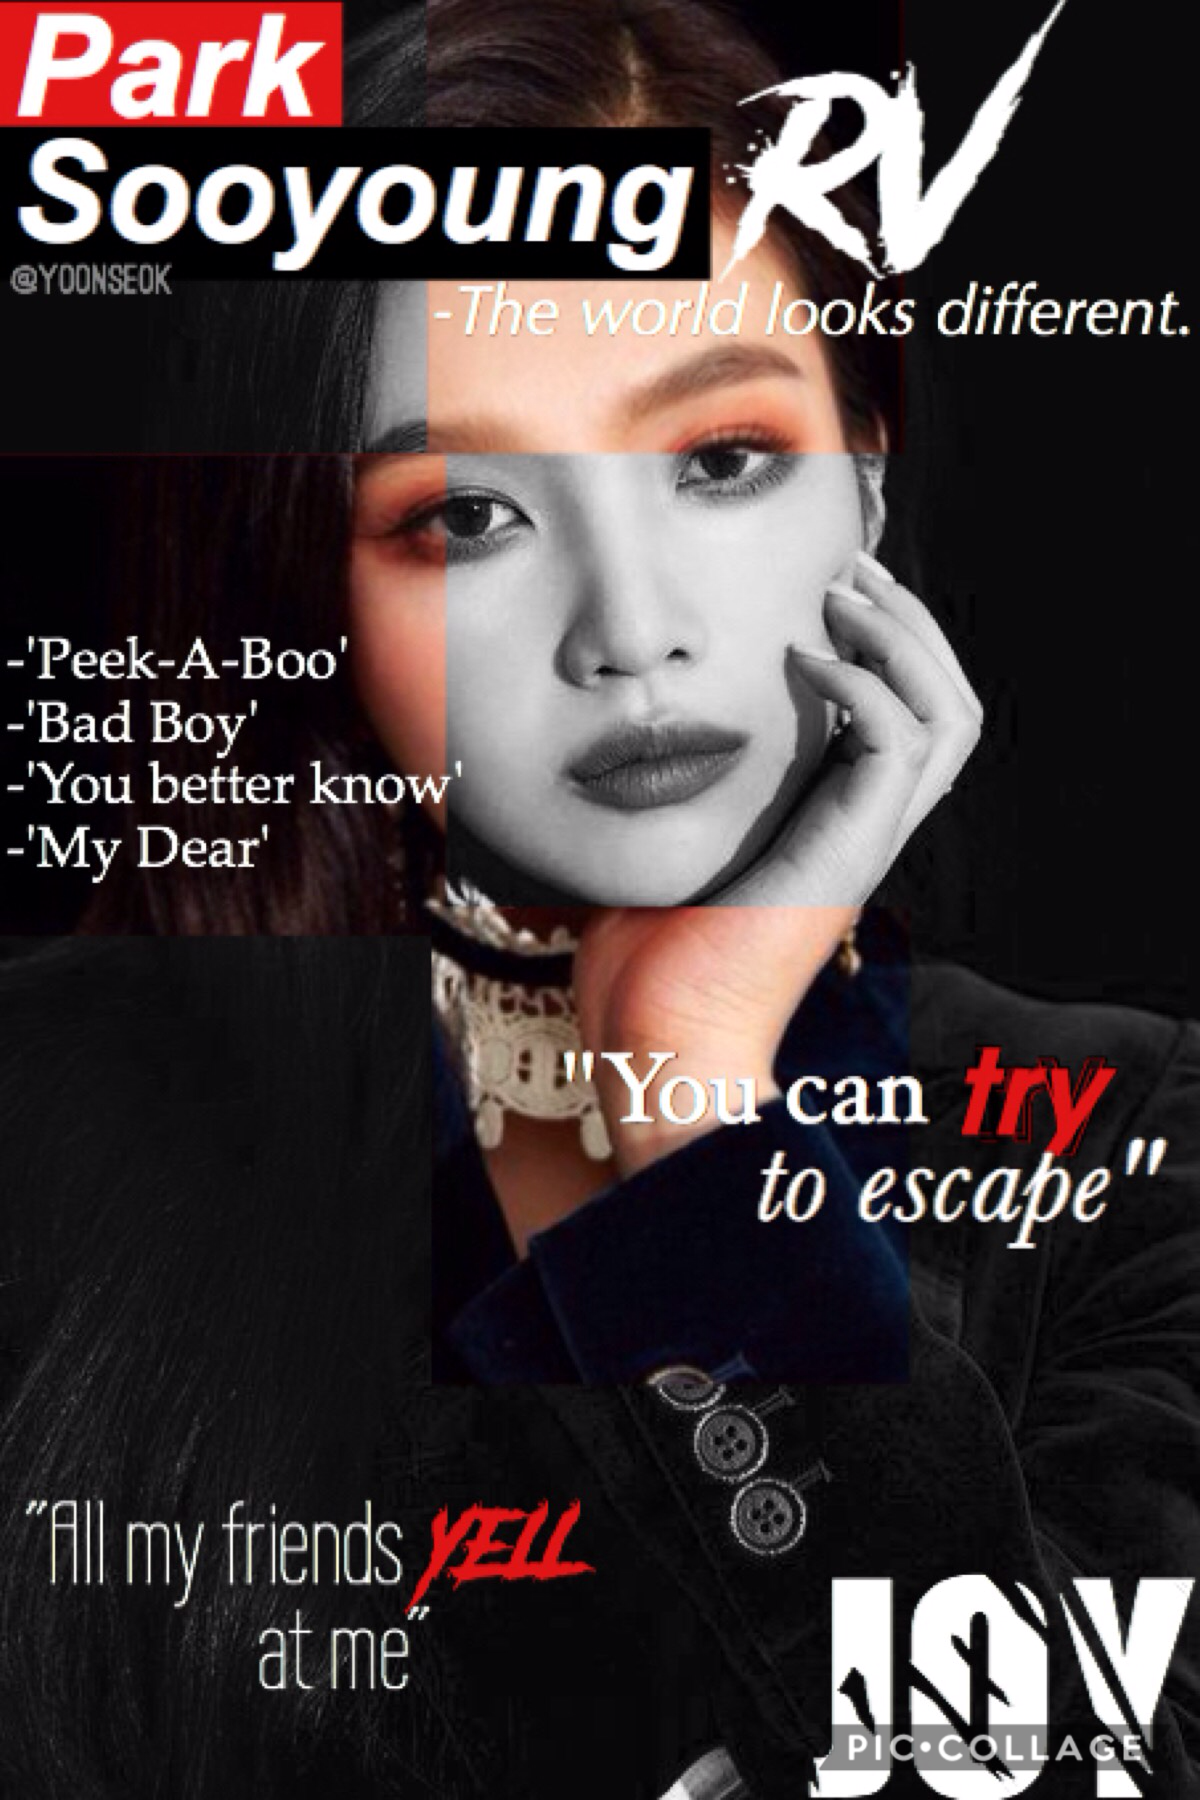 JOY. 
It's supposed to be a magazine cover thing…
☆Quotes are her lines from songs and dramas☆